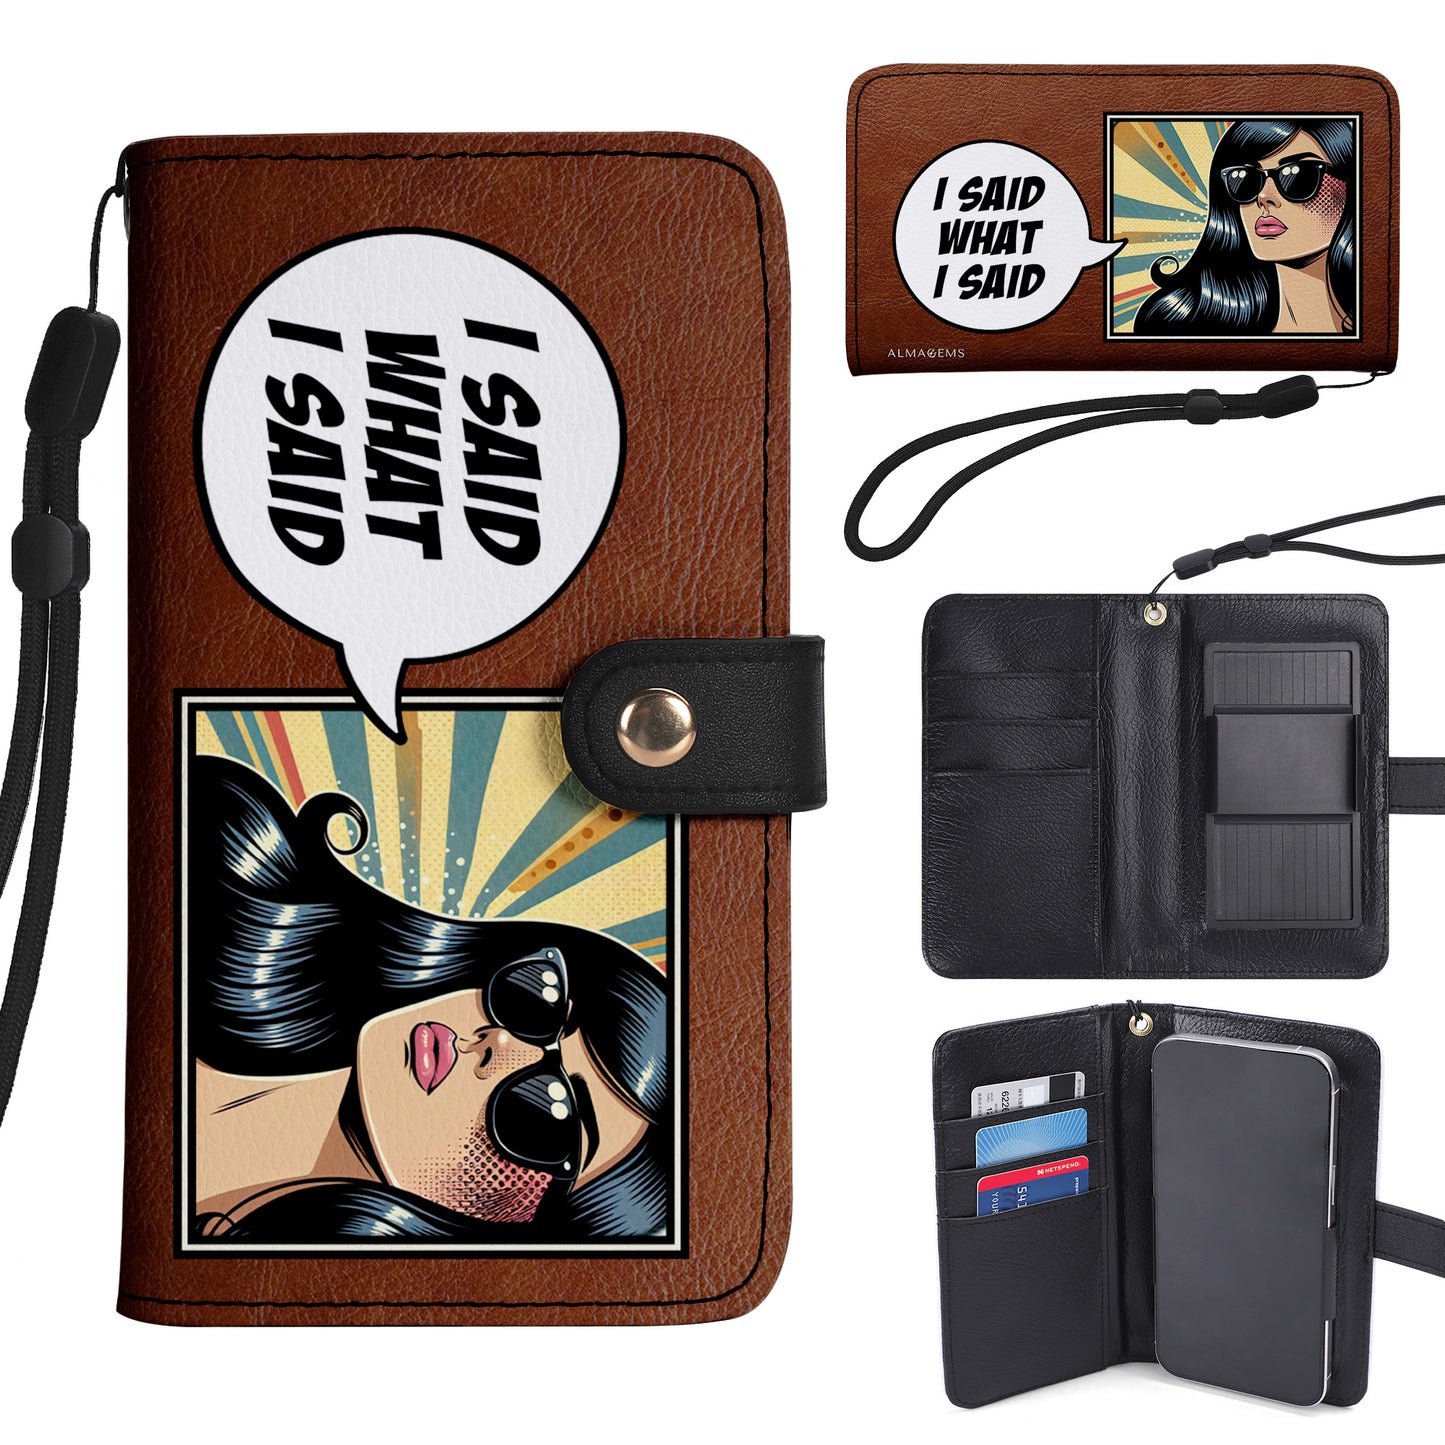 Special Custom Art and Text - Bespoke Phone Leather Wallet - QCUSTOM10PW